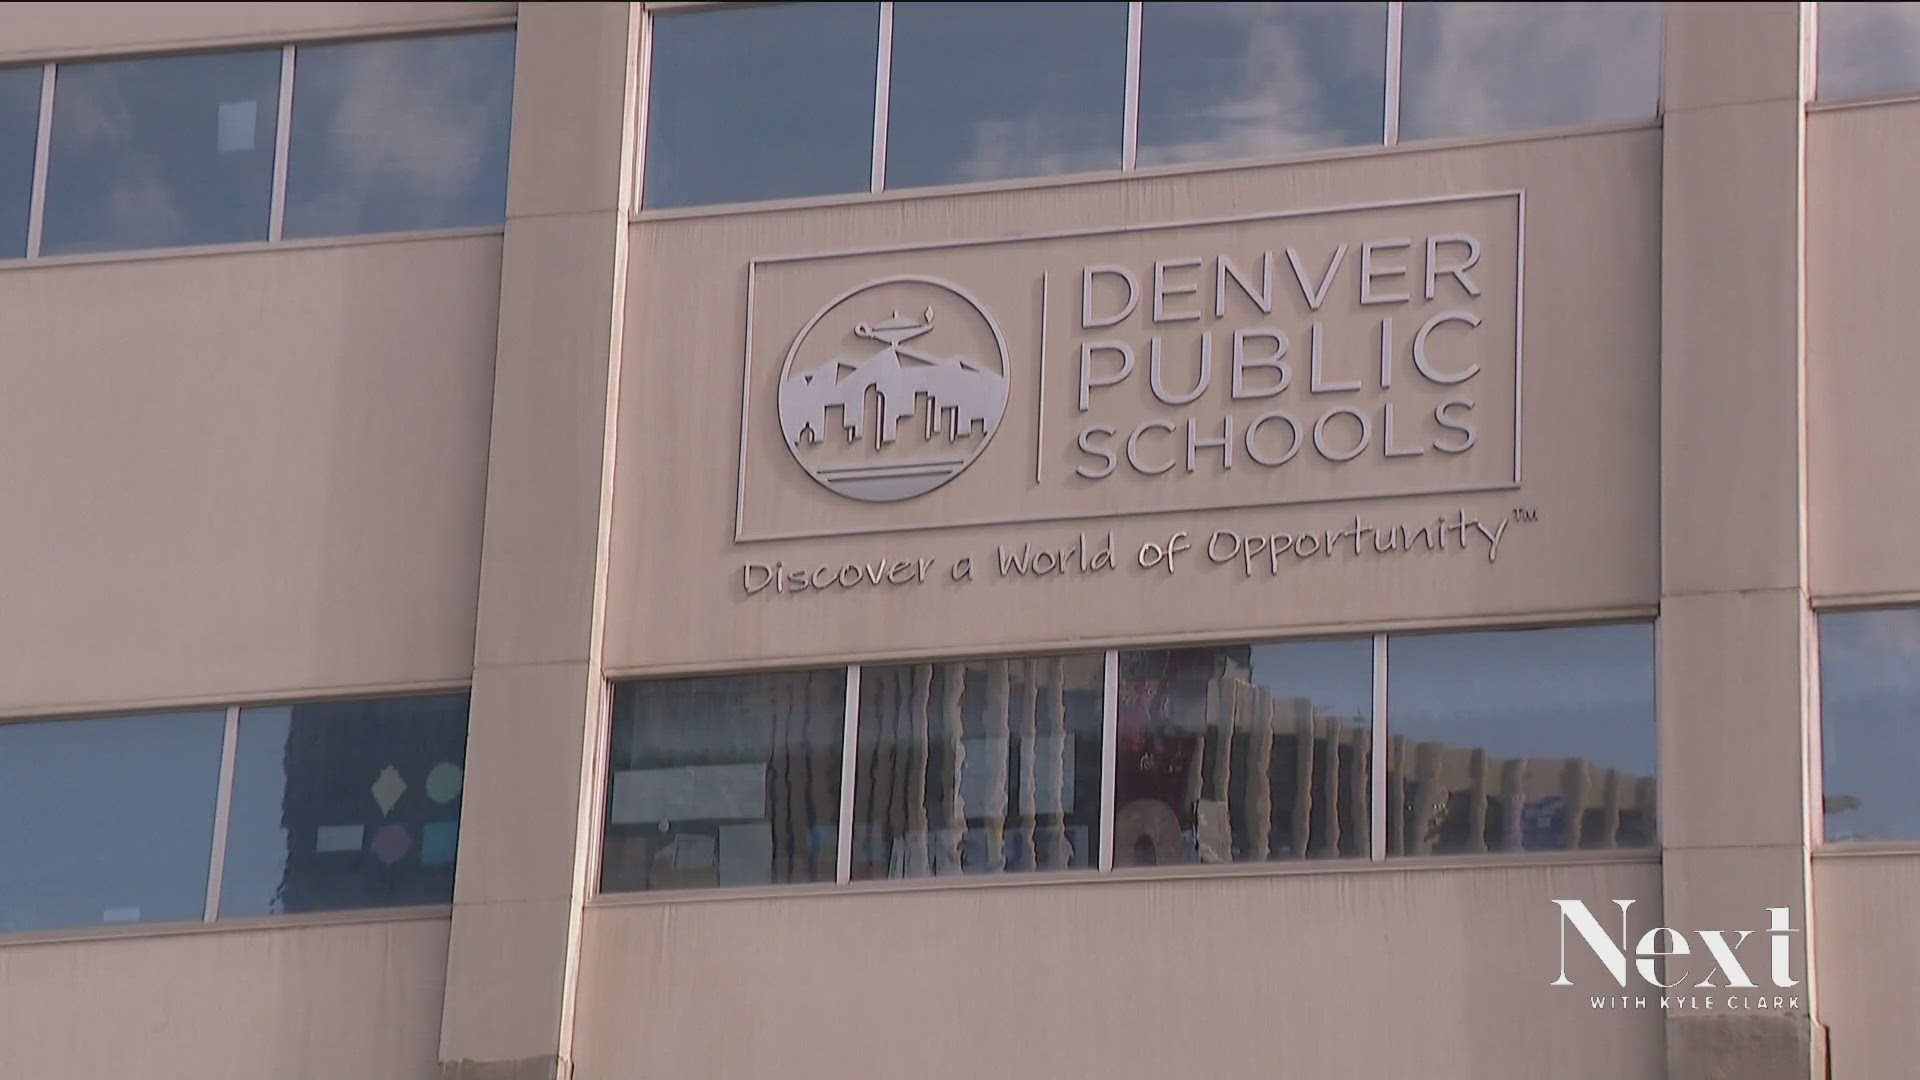 In 2020, SROs were removed from Denver Public Schools over concerns that black and brown students were disproportionately targeted. That concern is returning now.